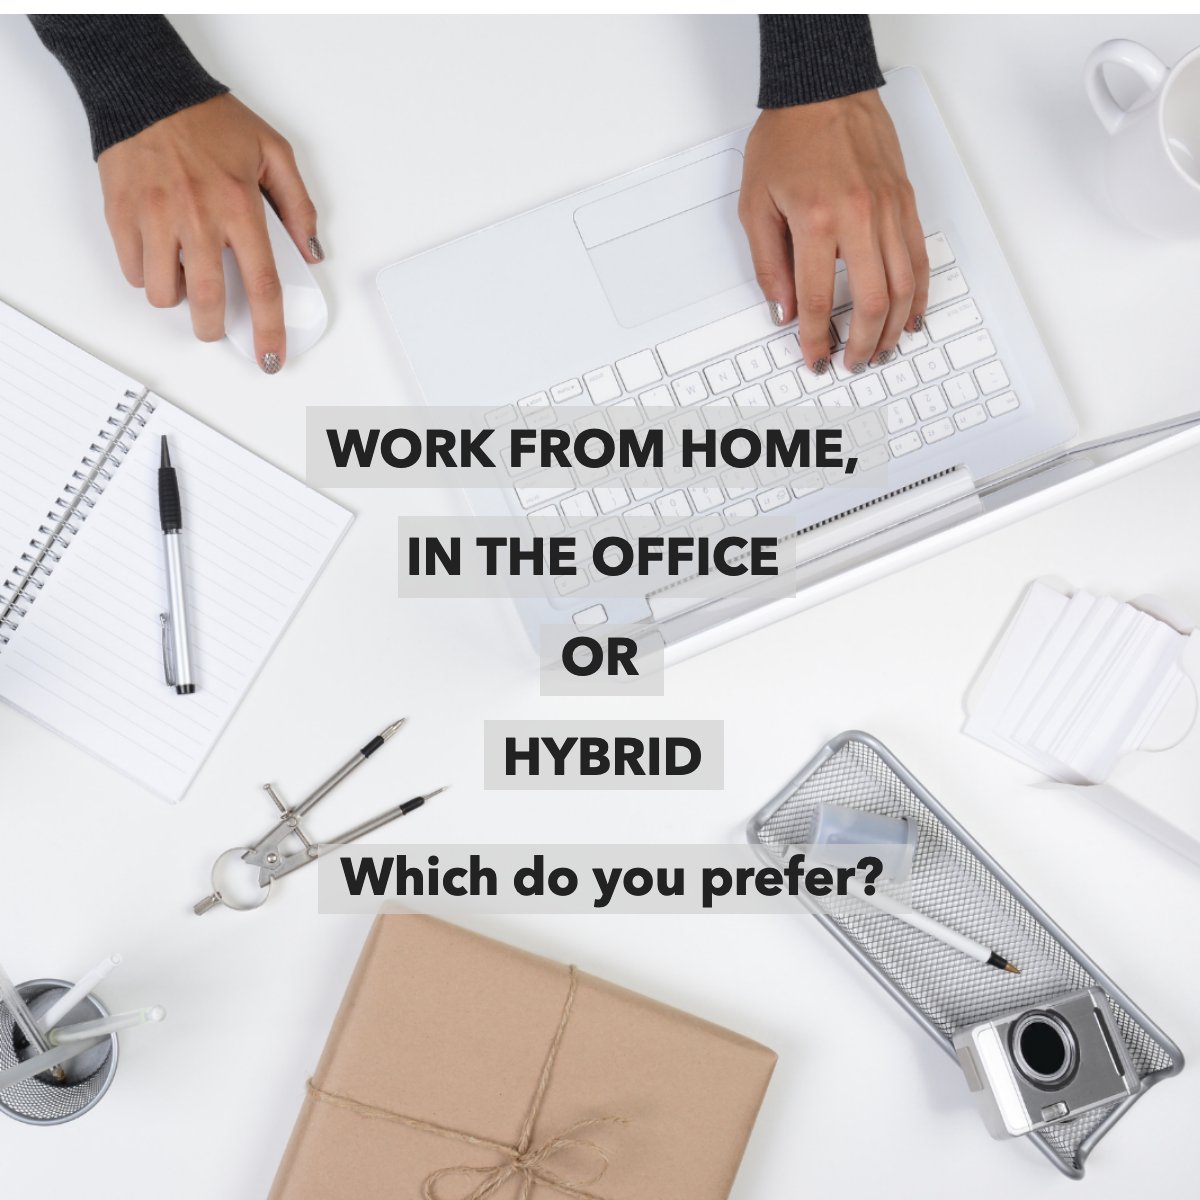 Do you have a dedicated working space? 💻
 
Tell us in the comments! 💭 

#question #workspace #worklife #homeoffice #hybridwork
 #eastvalerealtor #eastvalerealestate #eastvale #chinohillsrealtor #chinohillsrealestate #chinorealtor #chinorealestate #coronarealtor